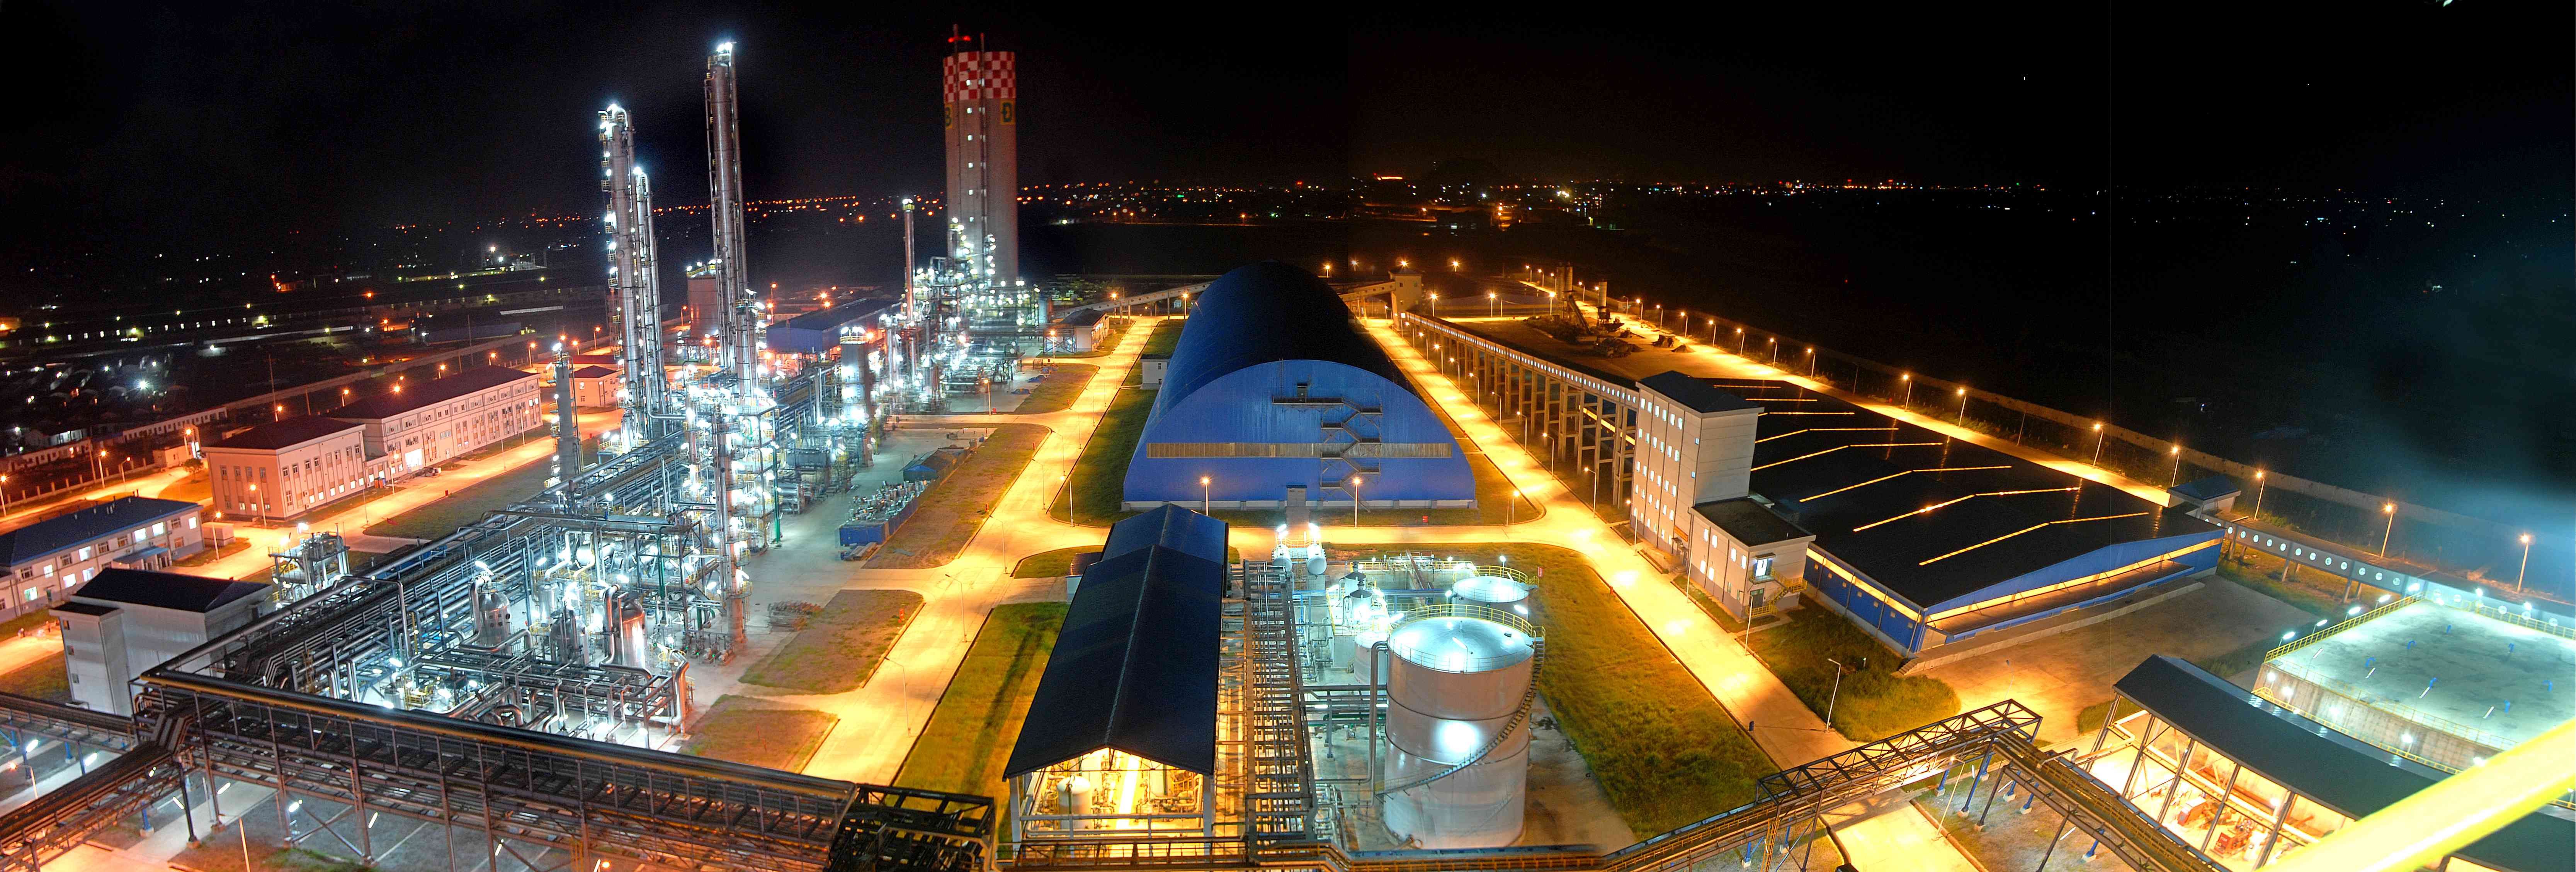 Night view of the installation of Nanning Ping Fertilizer Plant